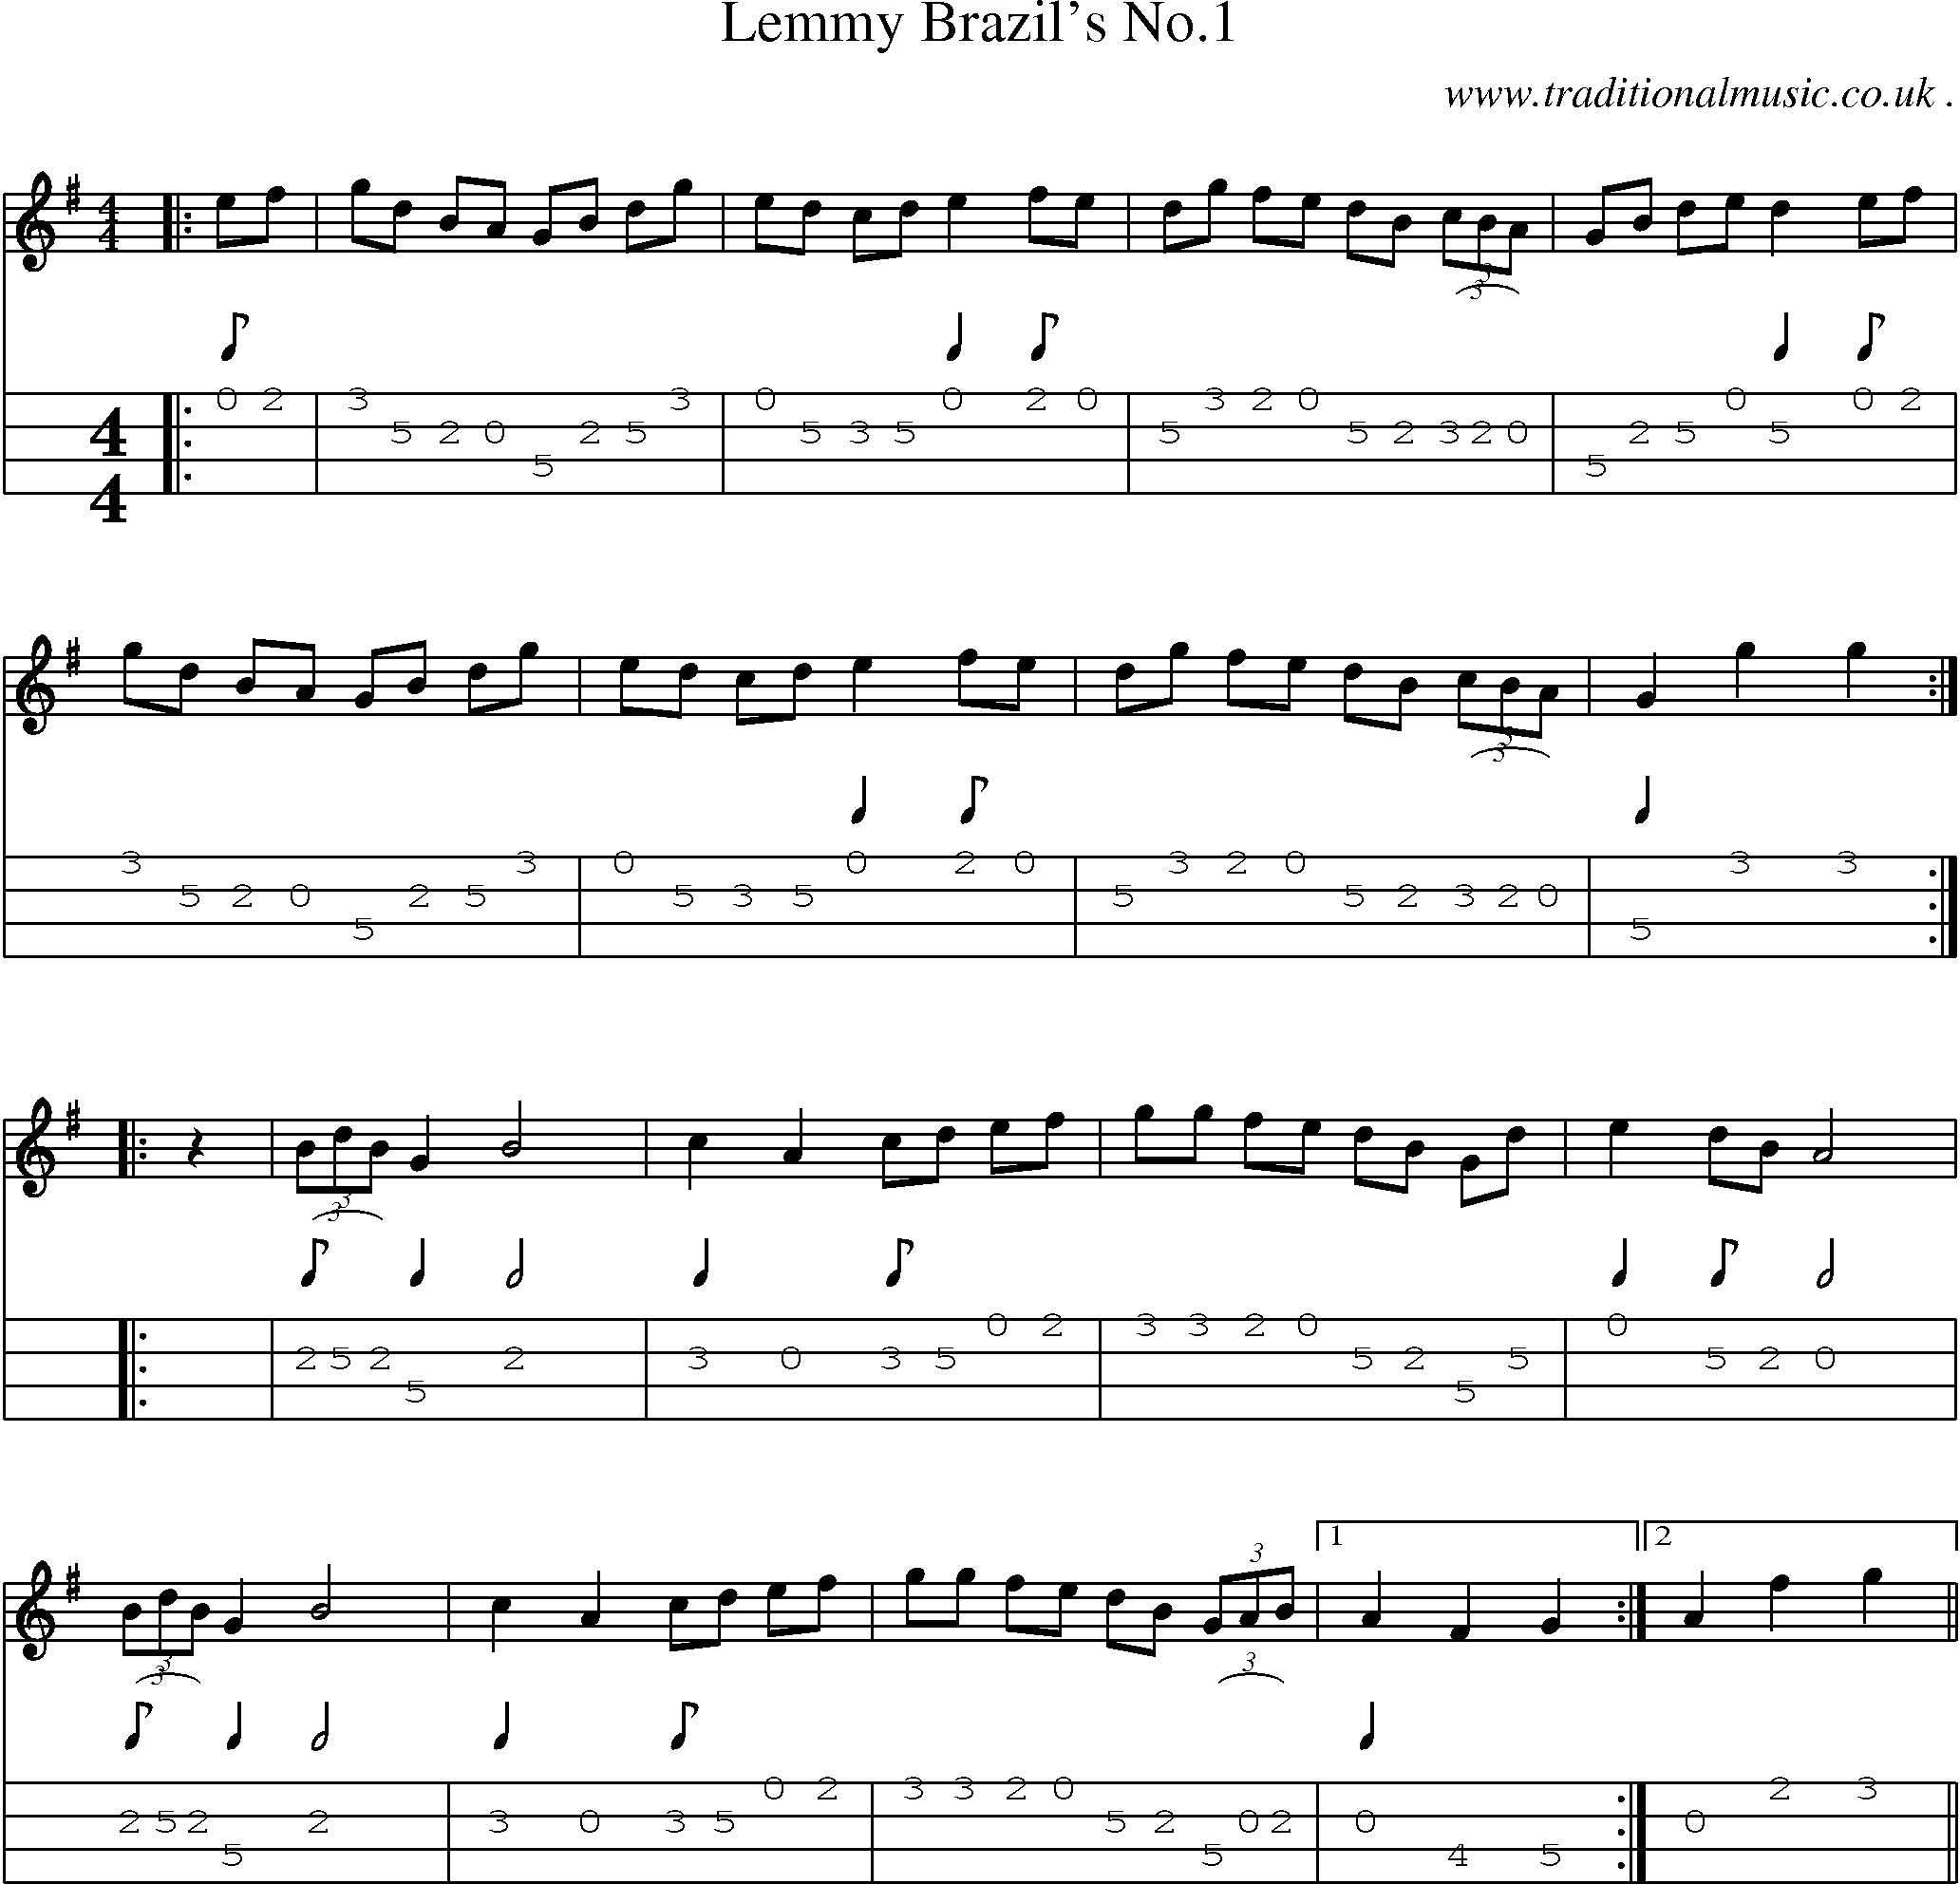 Sheet-Music and Mandolin Tabs for Lemmy Brazils No1